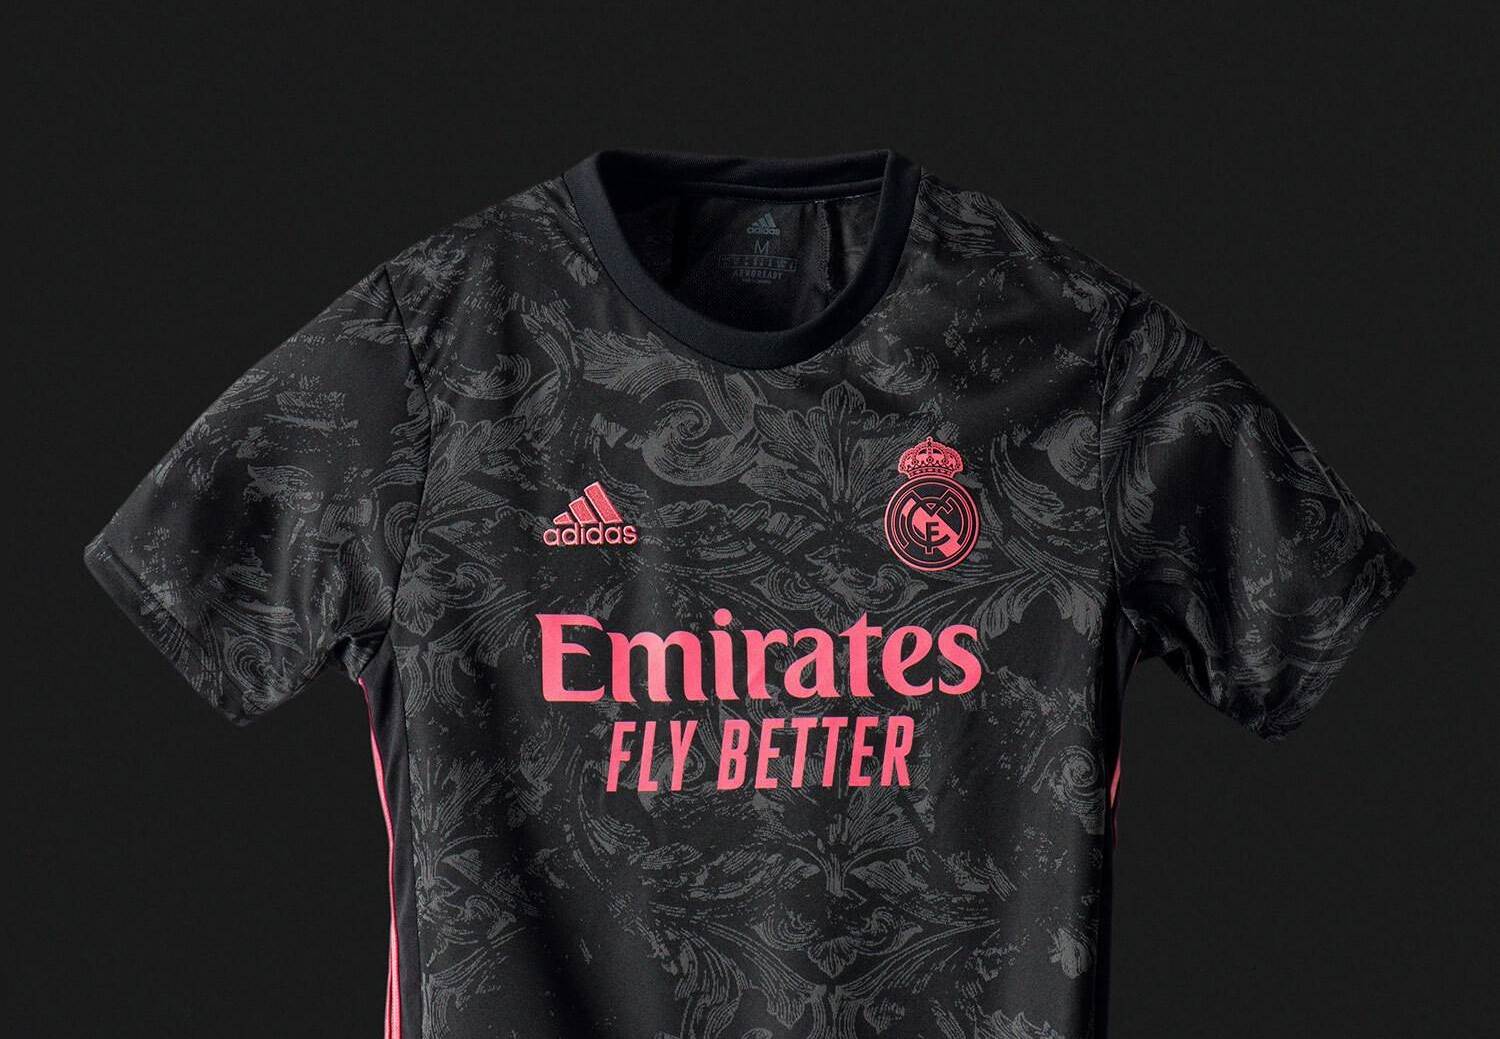 Adidas unveils baroque Real Madrid kit printed with Azulejos tile patterns